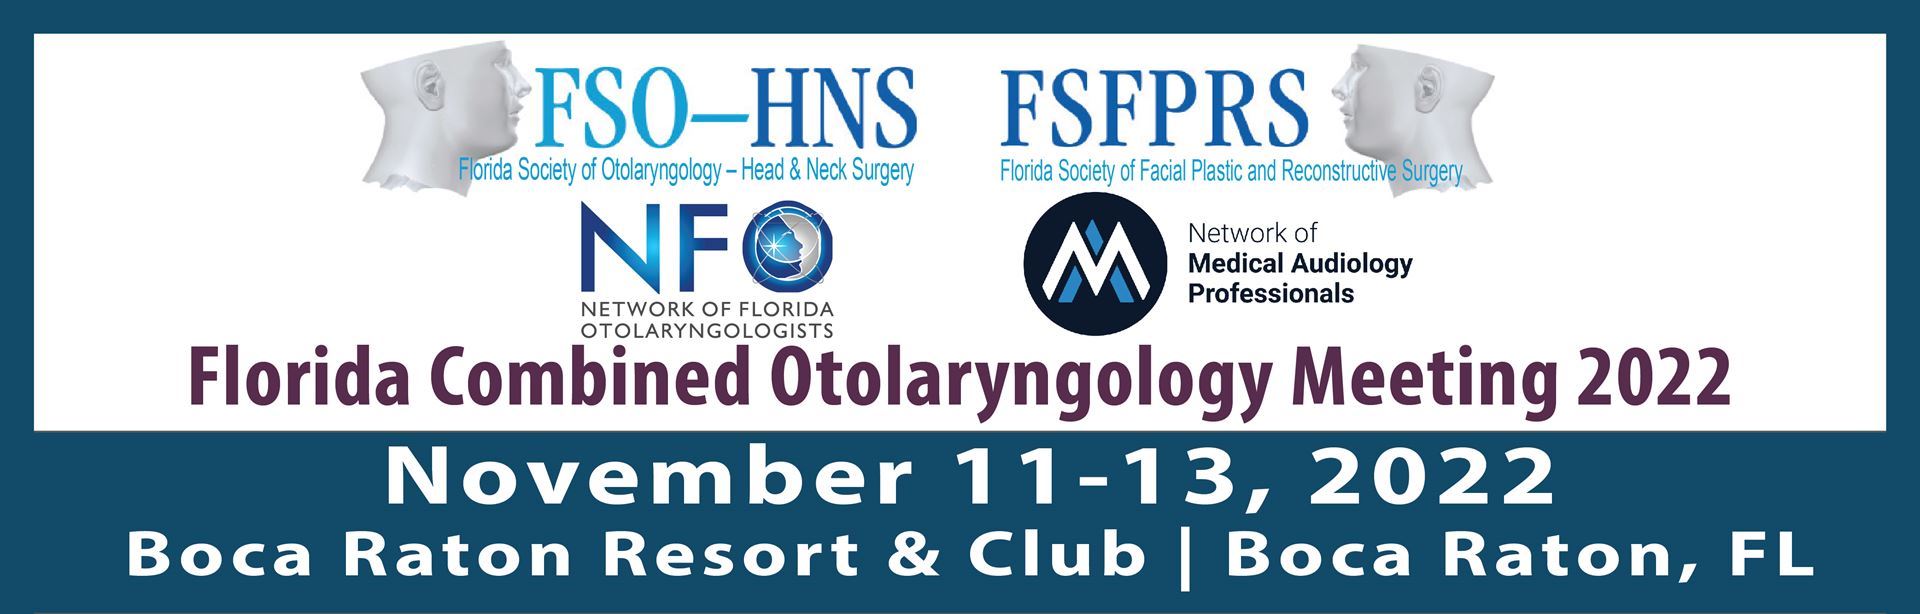 Florida Combined Otolaryngology 26th Annual Meeting 2022